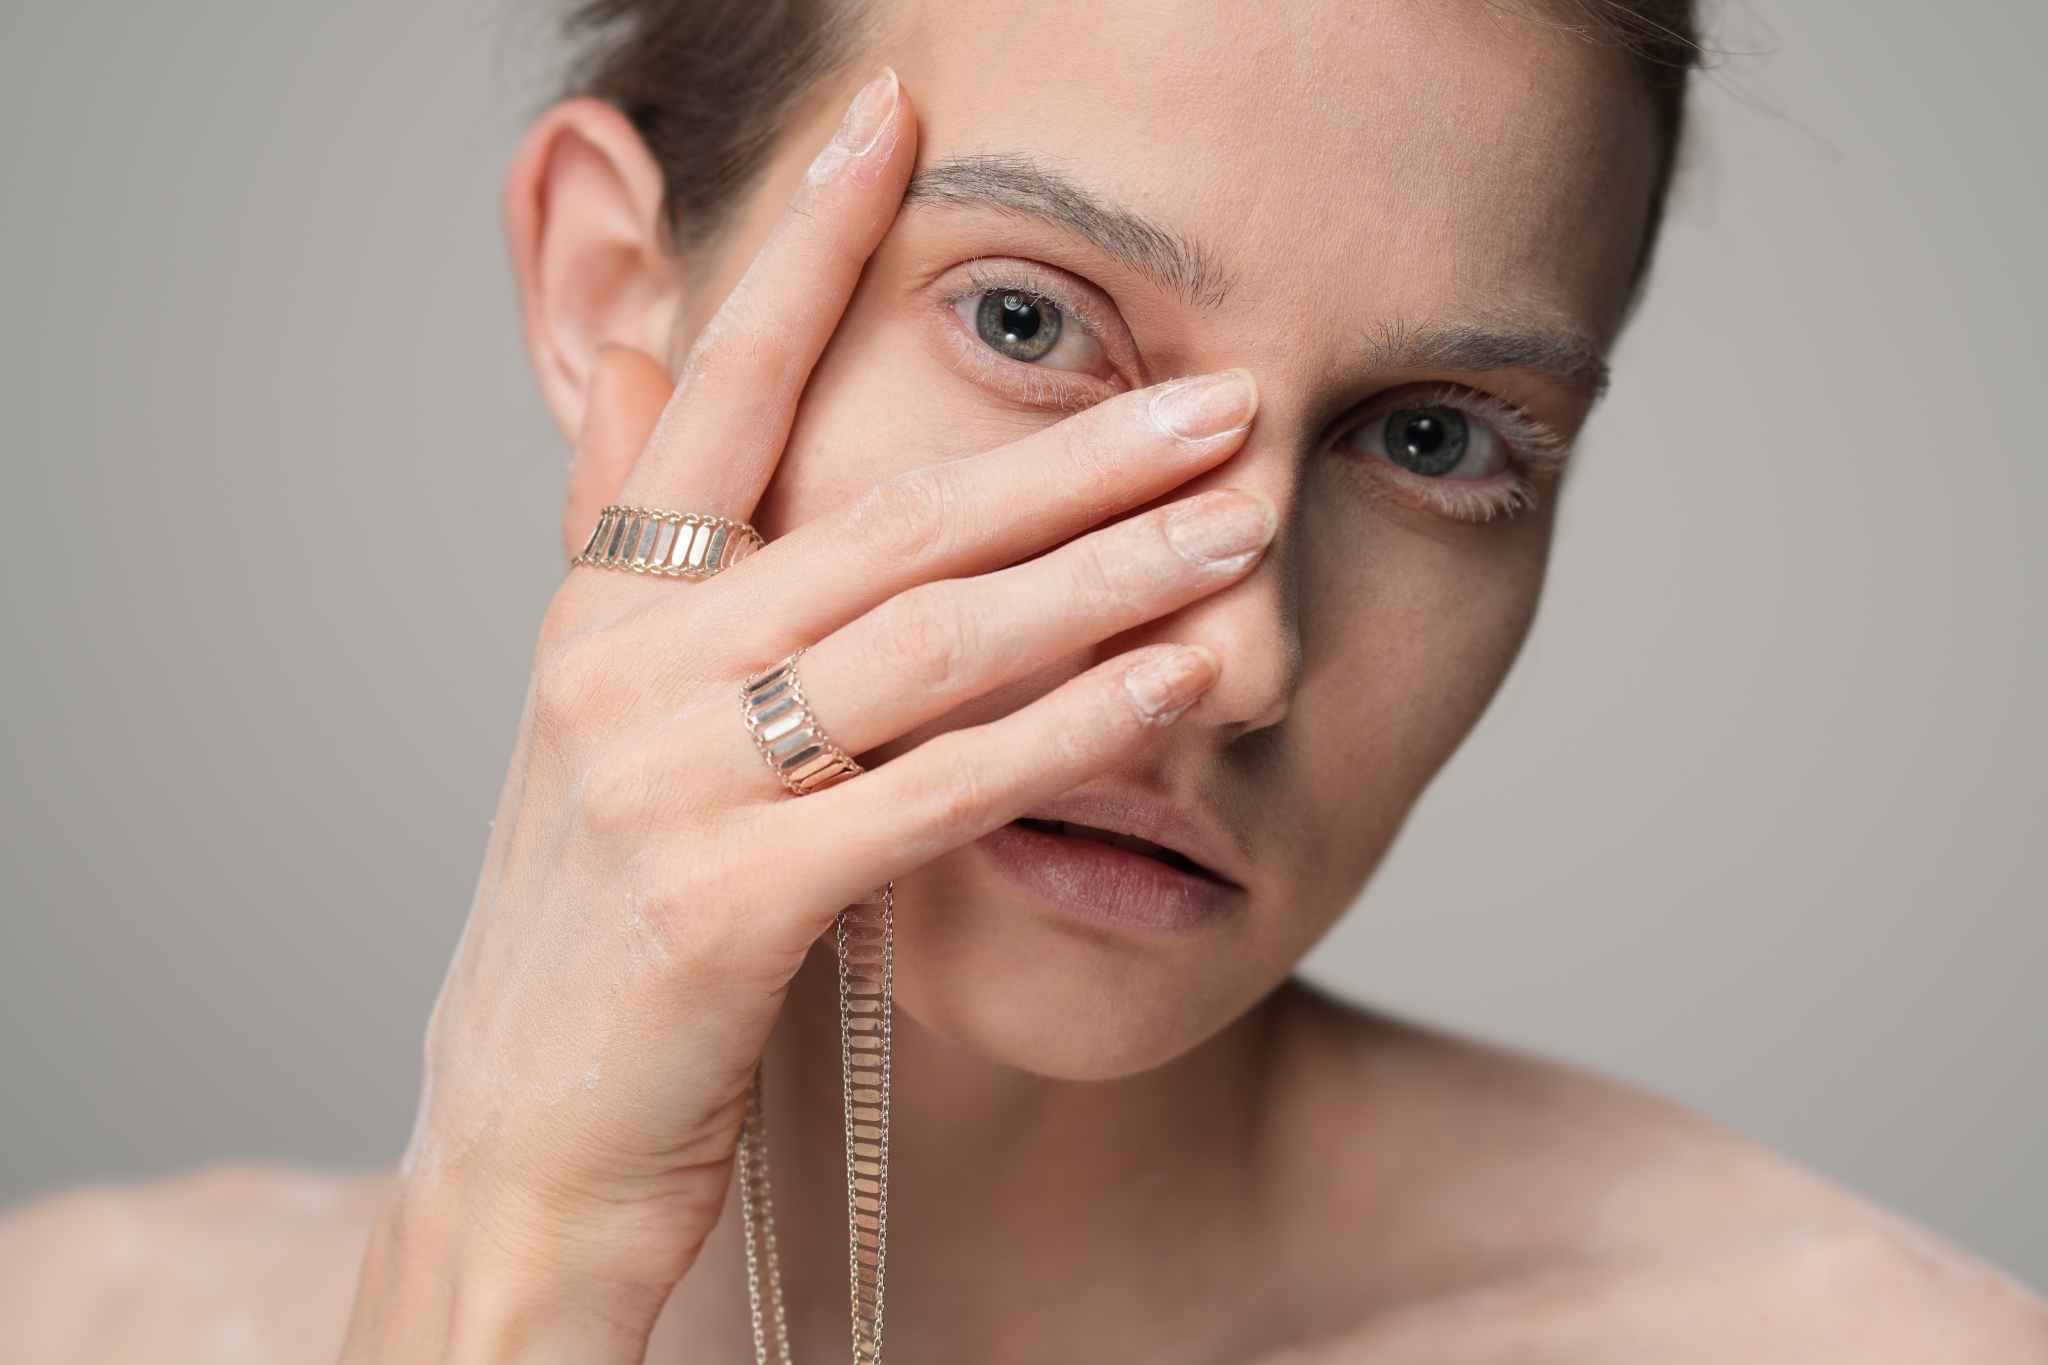 Portrait of female model looking through her fingers